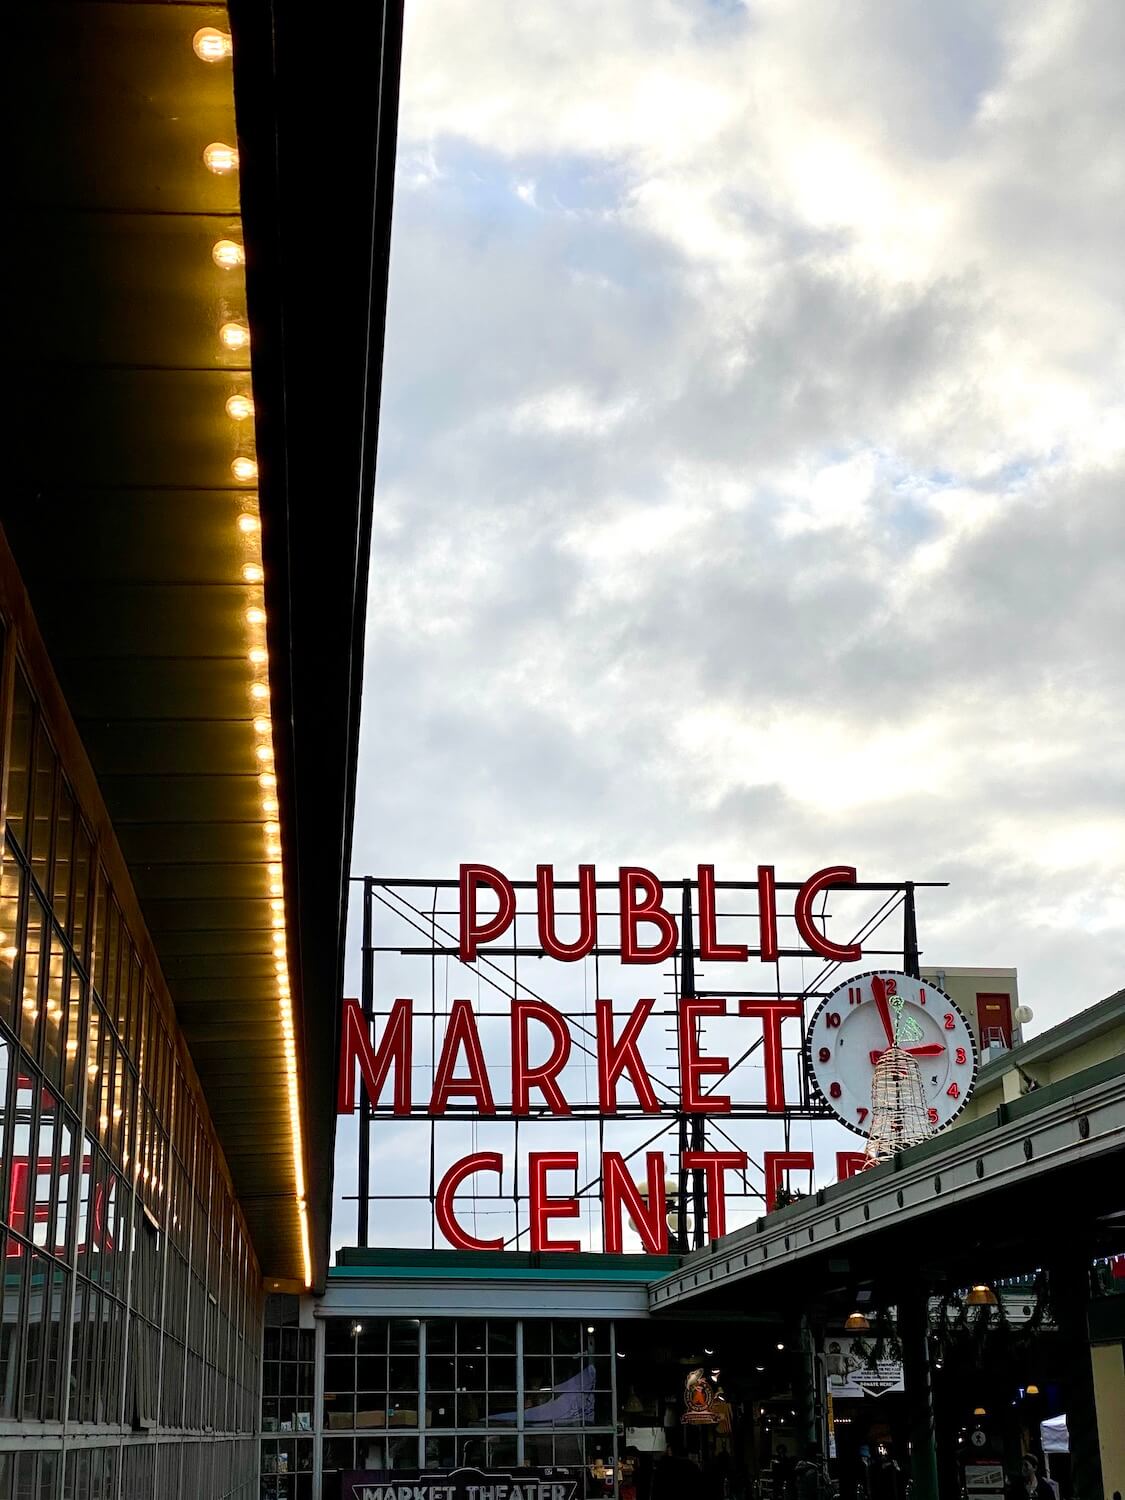 View of Pike Place Market in Seattle under Winter light.  The red neon letters say Market Center and the large clock shows almost 3PM.